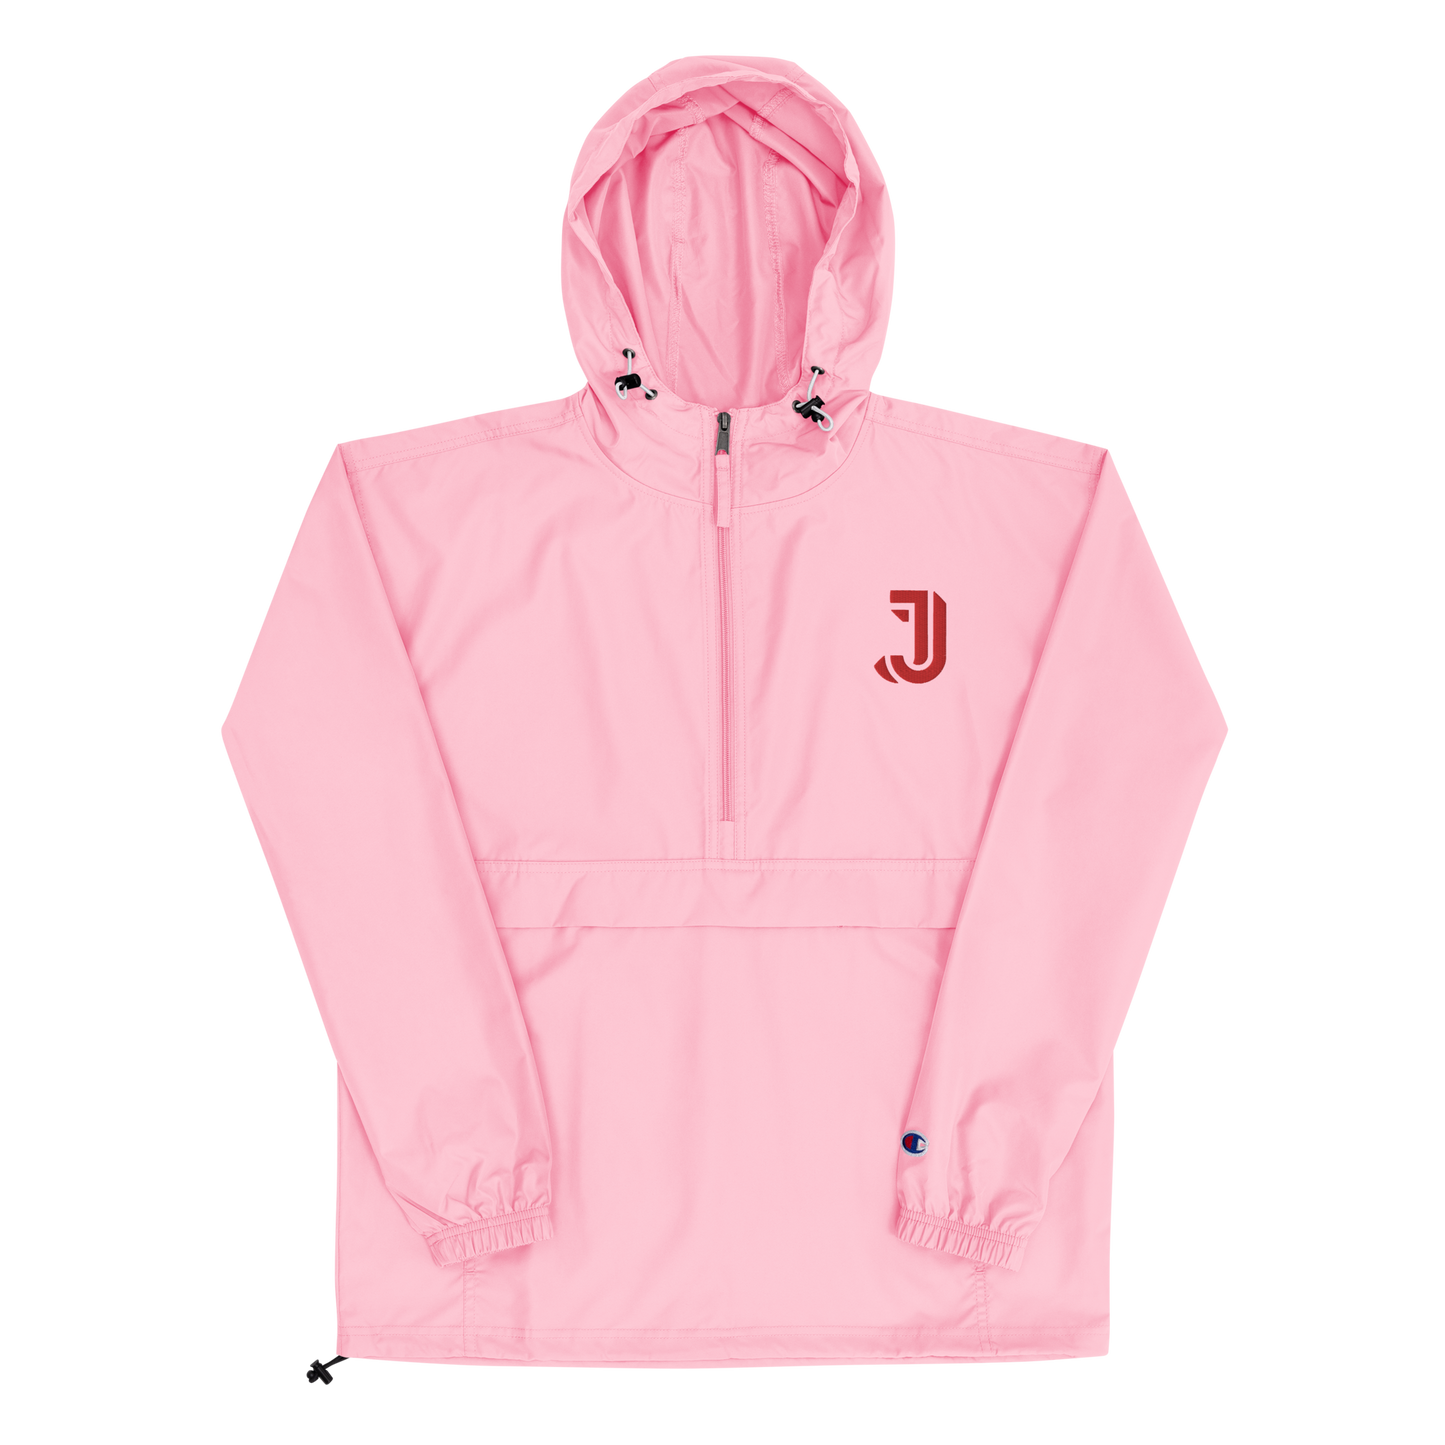 JOLLY EMBROIDERED CHAMPION JACKET